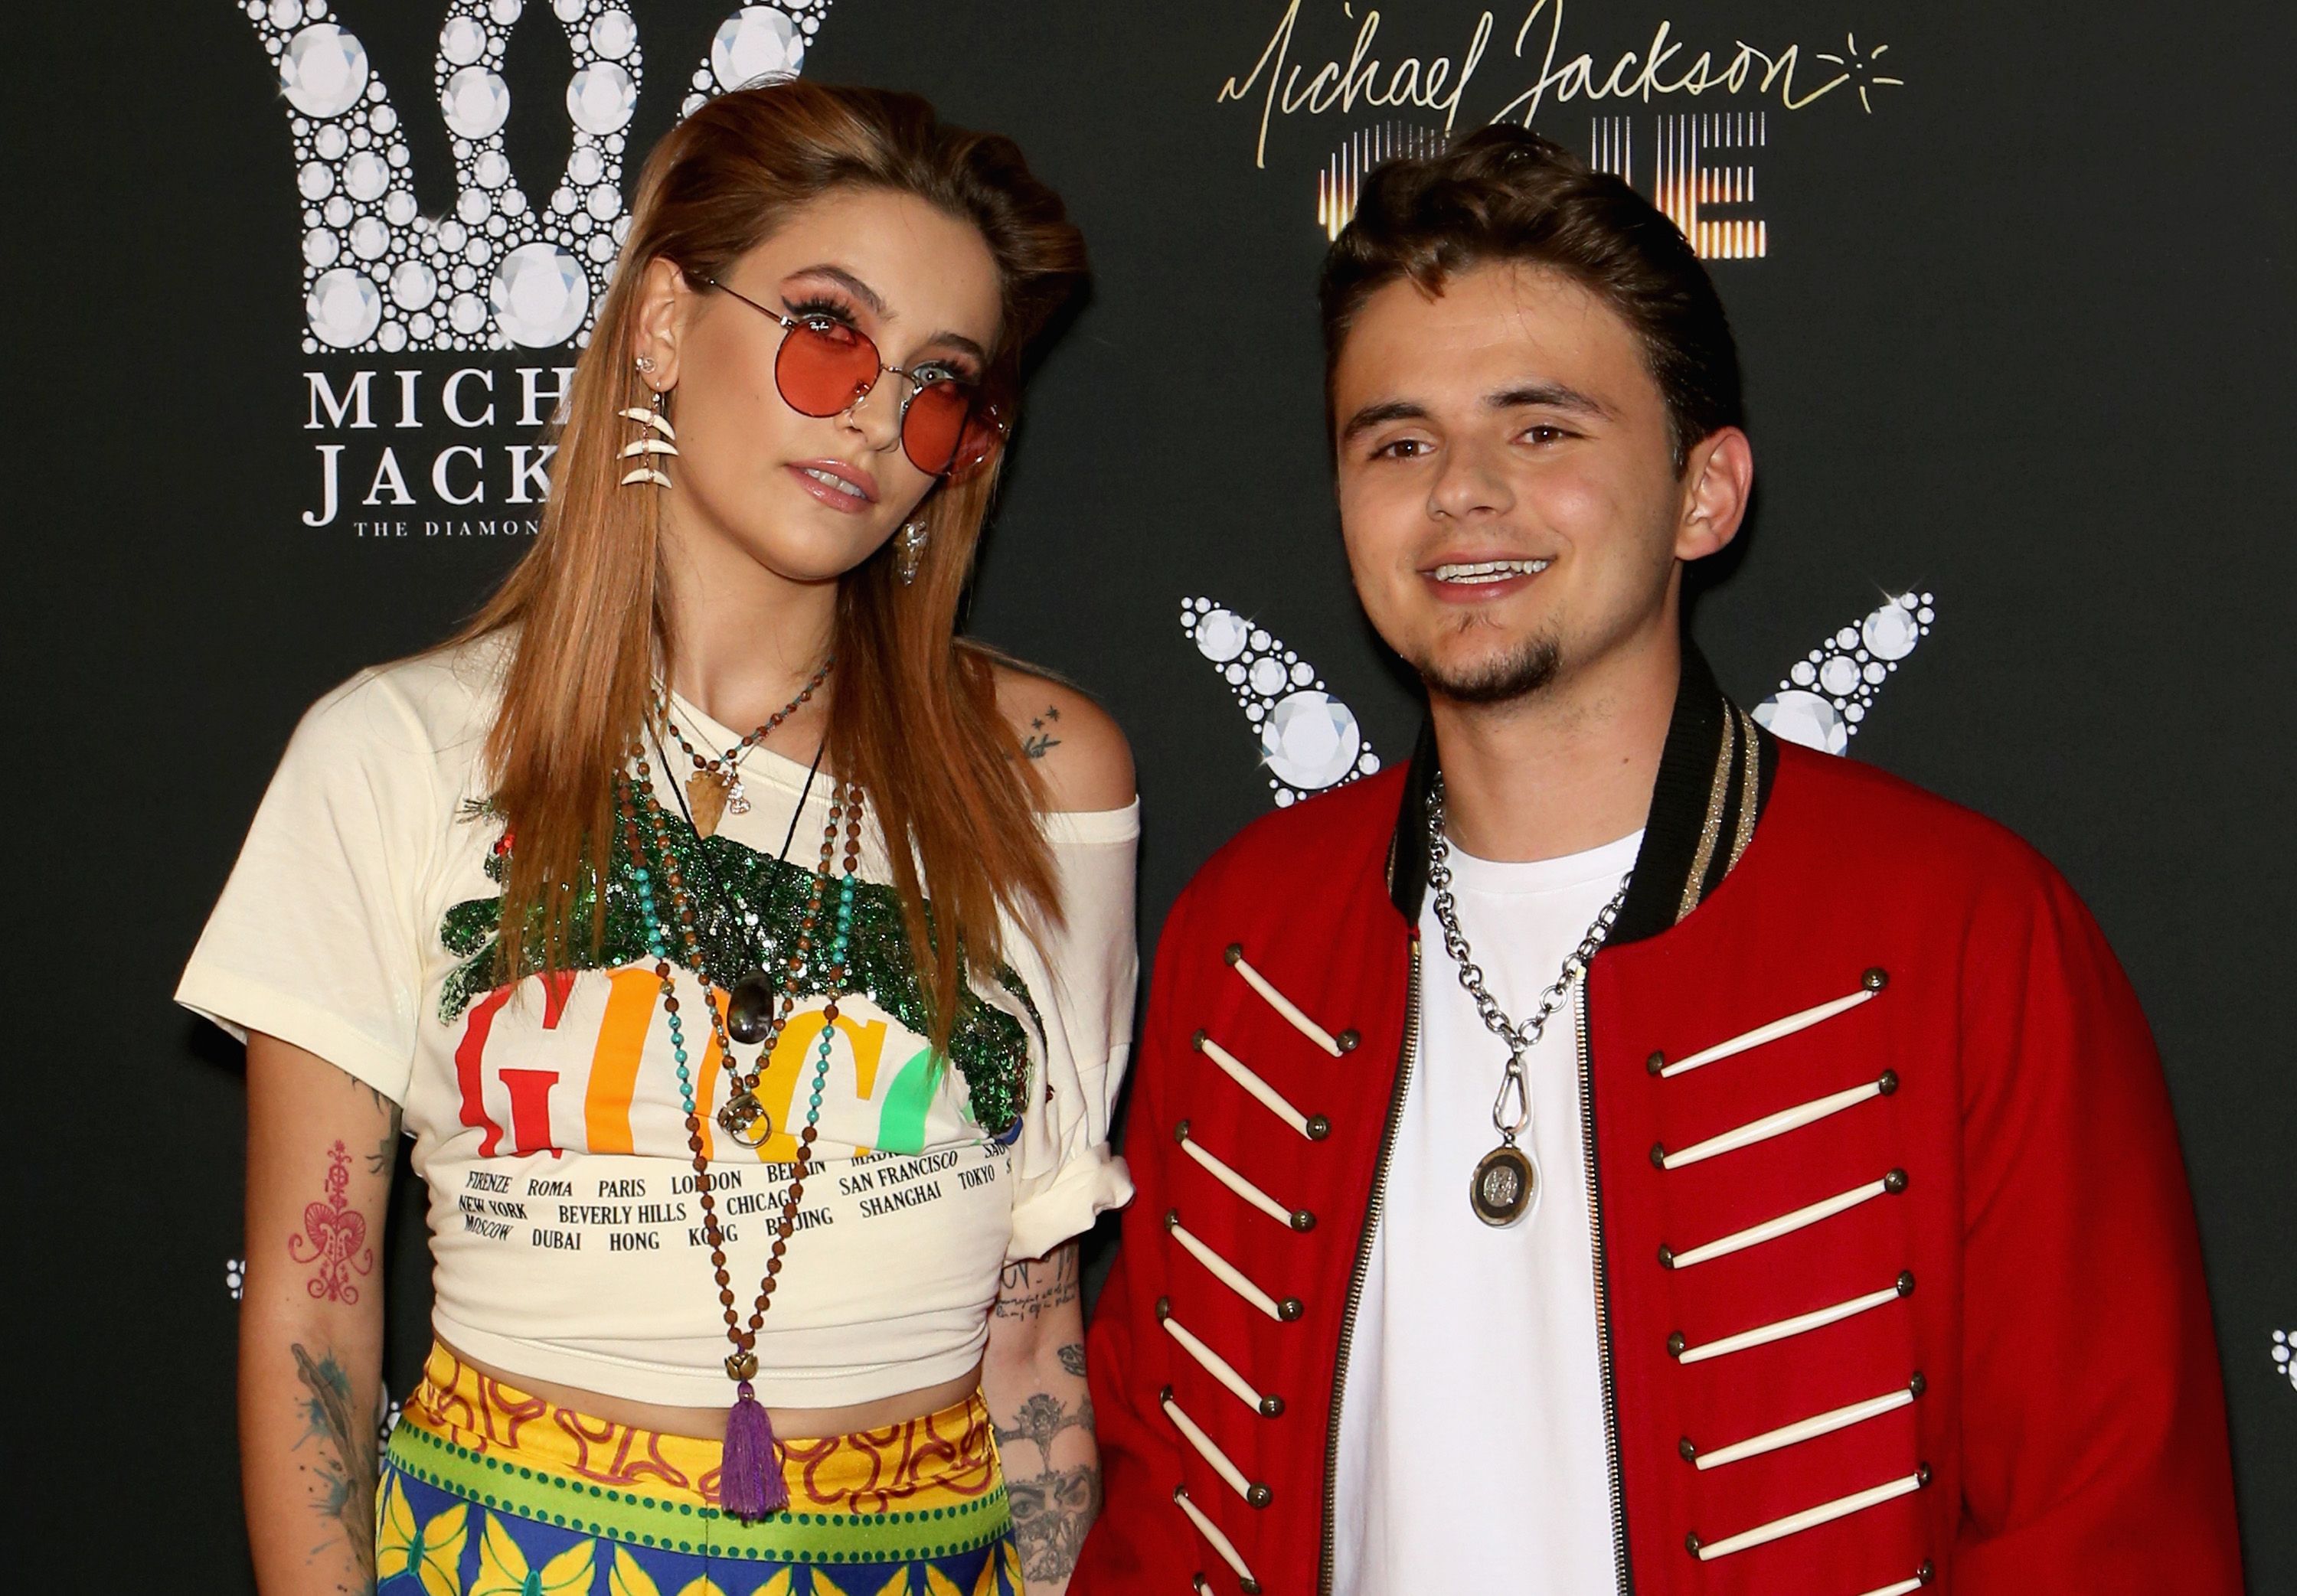 Paris Jackson and her brother Prince Michael Jackson at the Michael Jackson diamond birthday celebration at Mandalay Bay Resort and Casino on August 29, 2018 in Las Vegas, Nevada. | Photo: Getty Images